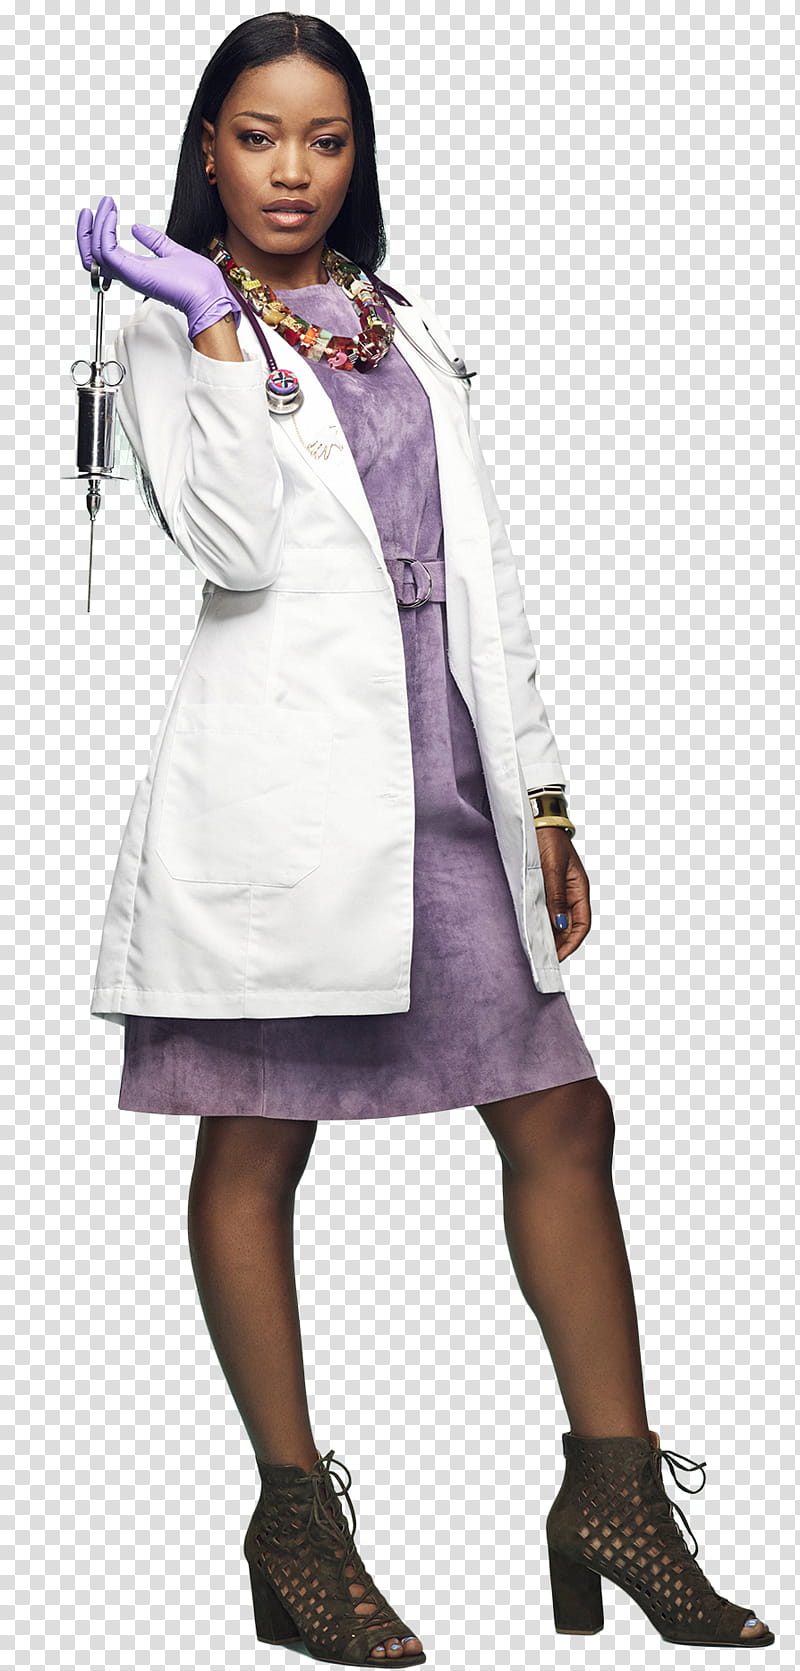 Scream Queens Keke Palmer as Zayday Willia transparent background PNG clipart